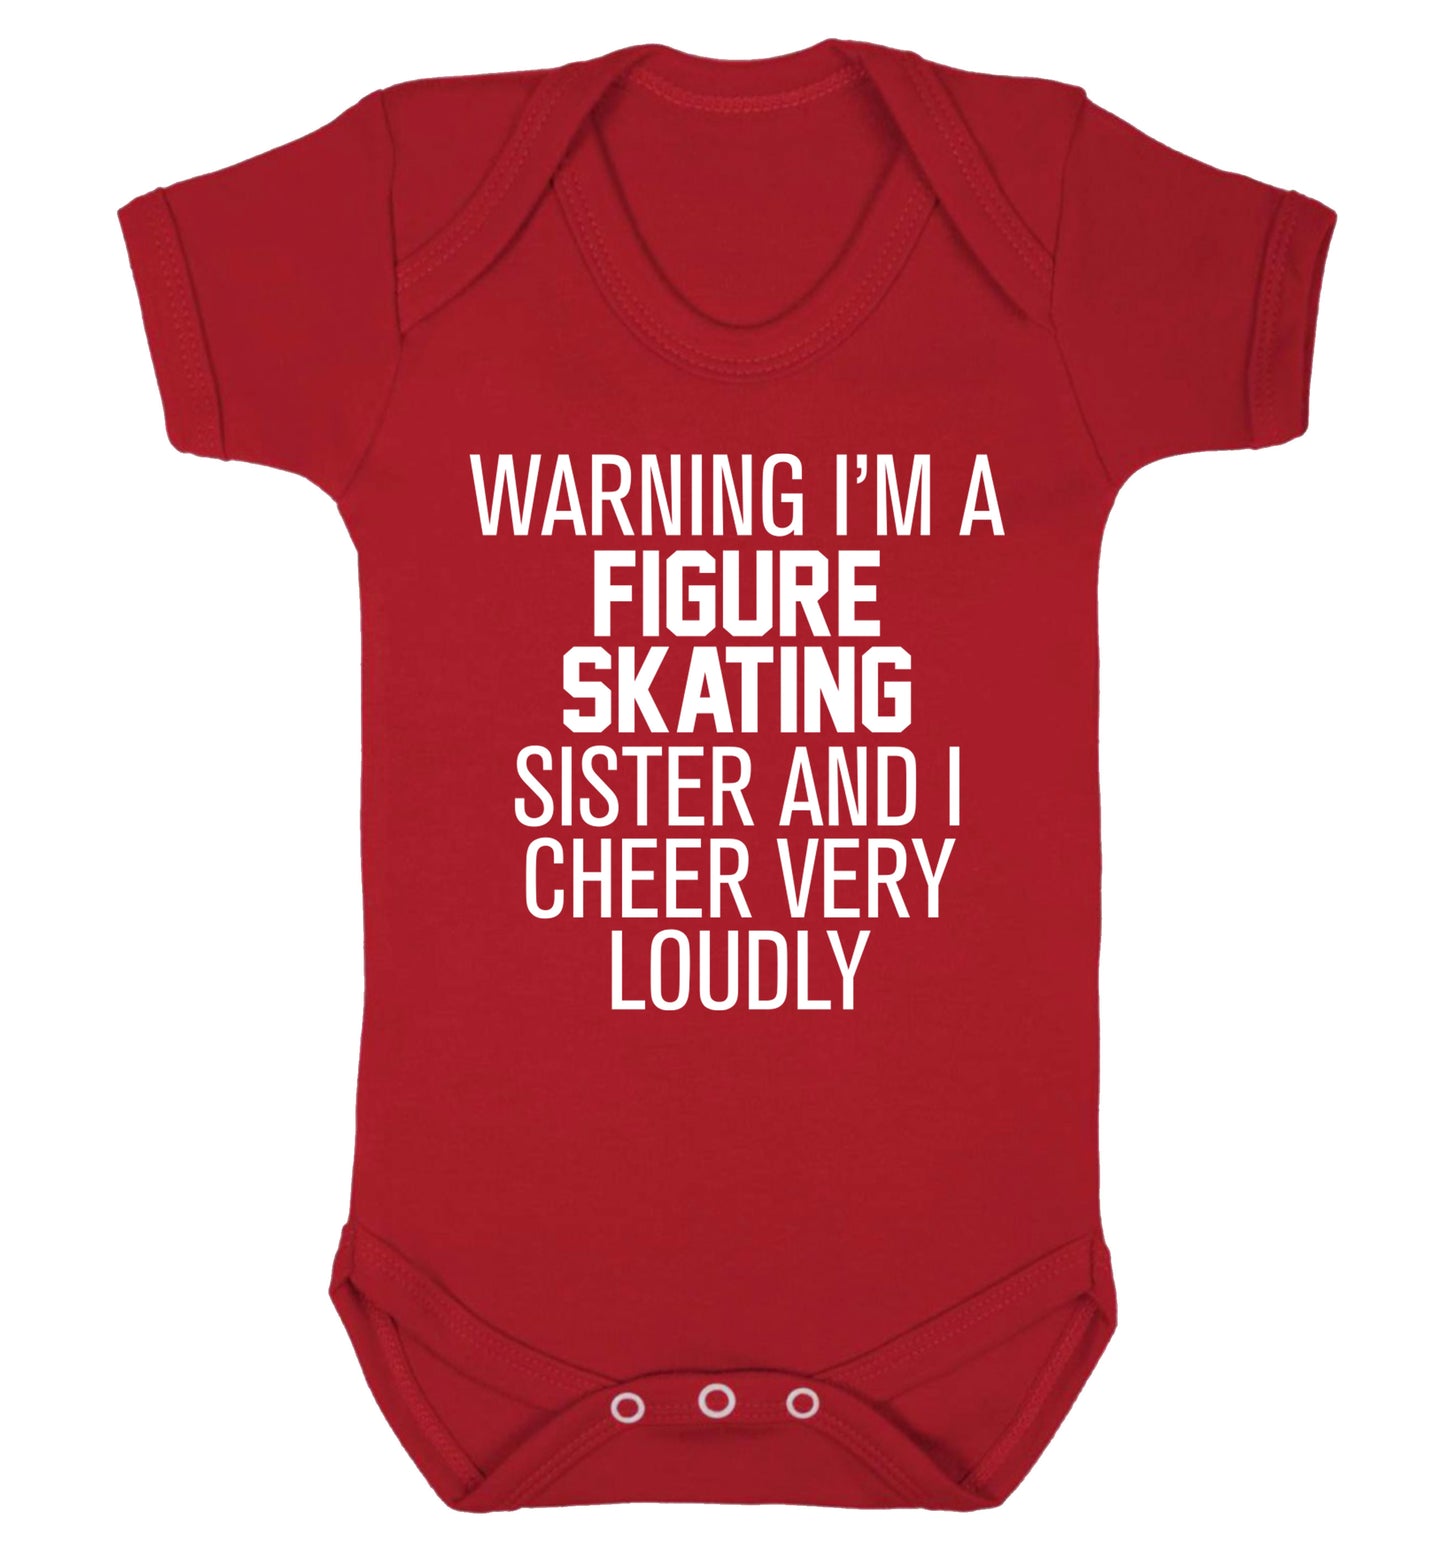 Warning I'm a figure skating sister and I cheer very loudly Baby Vest red 18-24 months